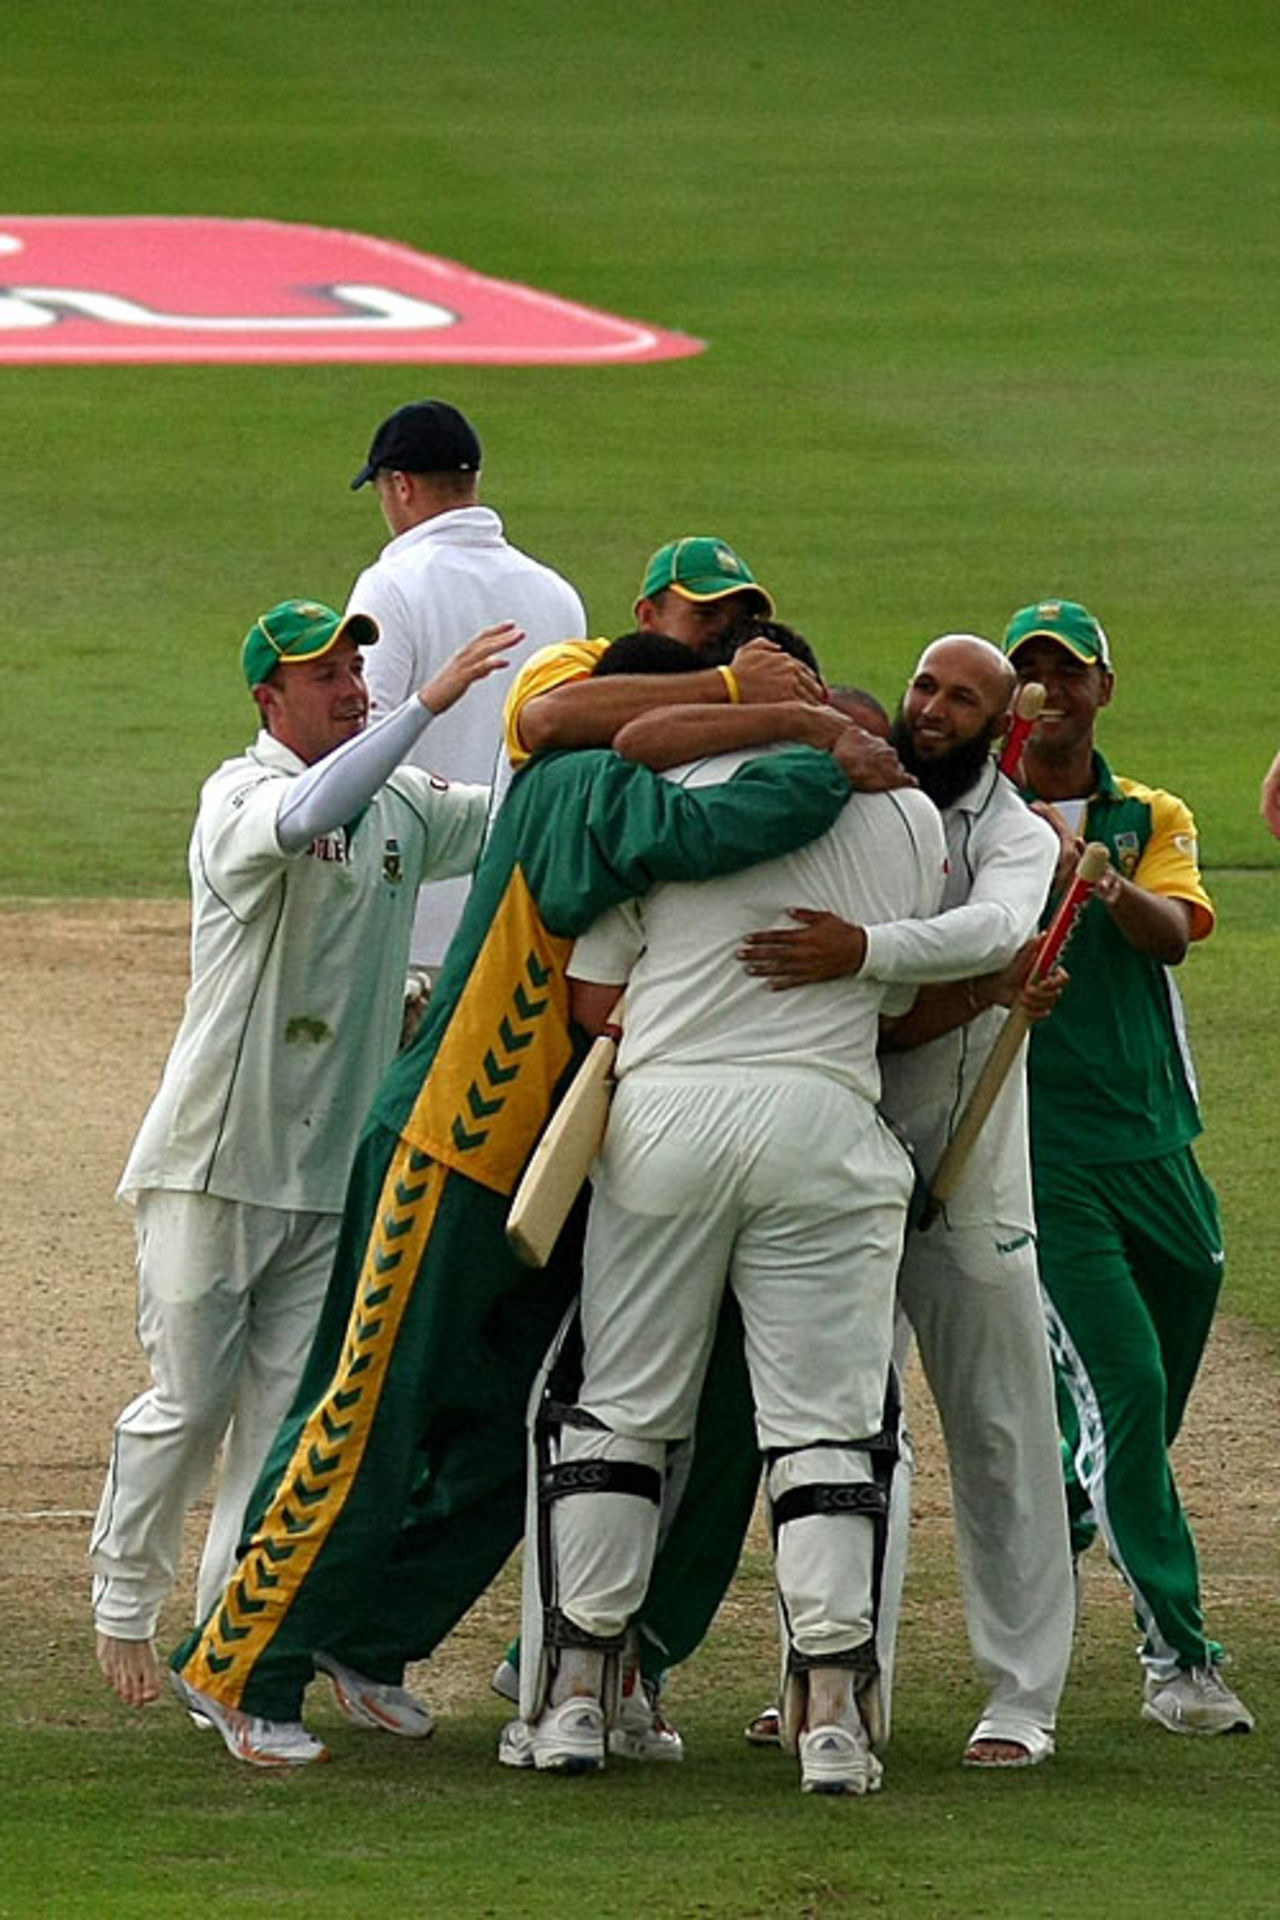 Graeme Smith is mobbed by his team-mates after leading South Africa to their first series victory in England since 1965, England v South Africa, 3rd Test, Edgbaston, August 2, 2008